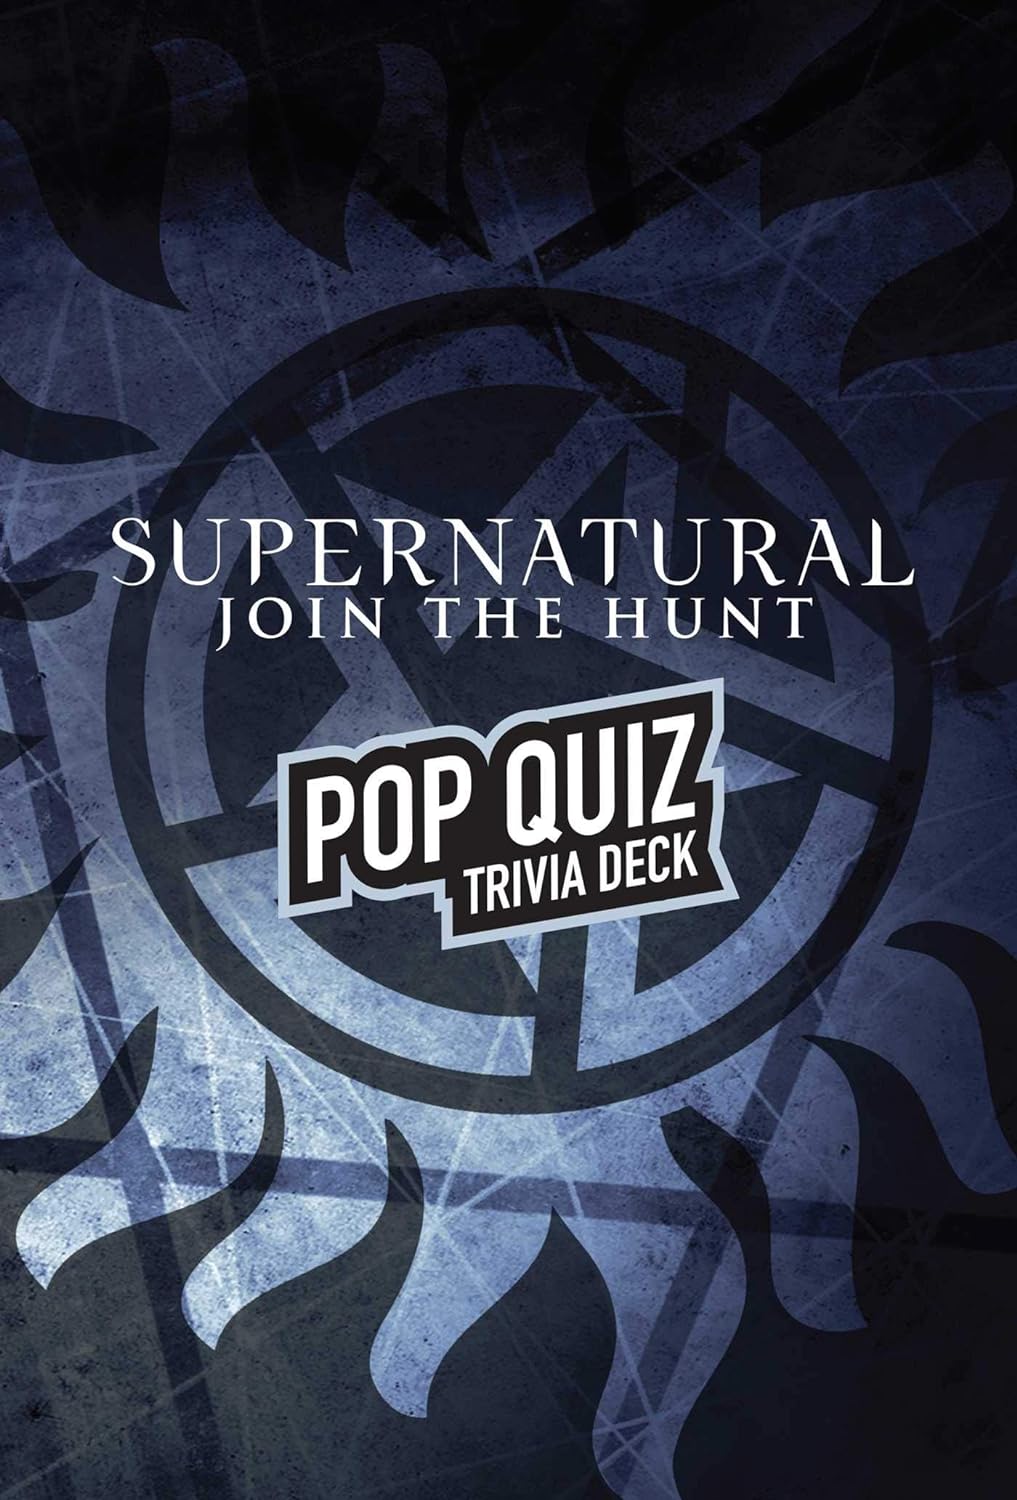 A black card with a light blue anti-possession symbol in the background. In the center is white text saying "Supernatural: join the hunt. Pop Quiz Trivia Deck"